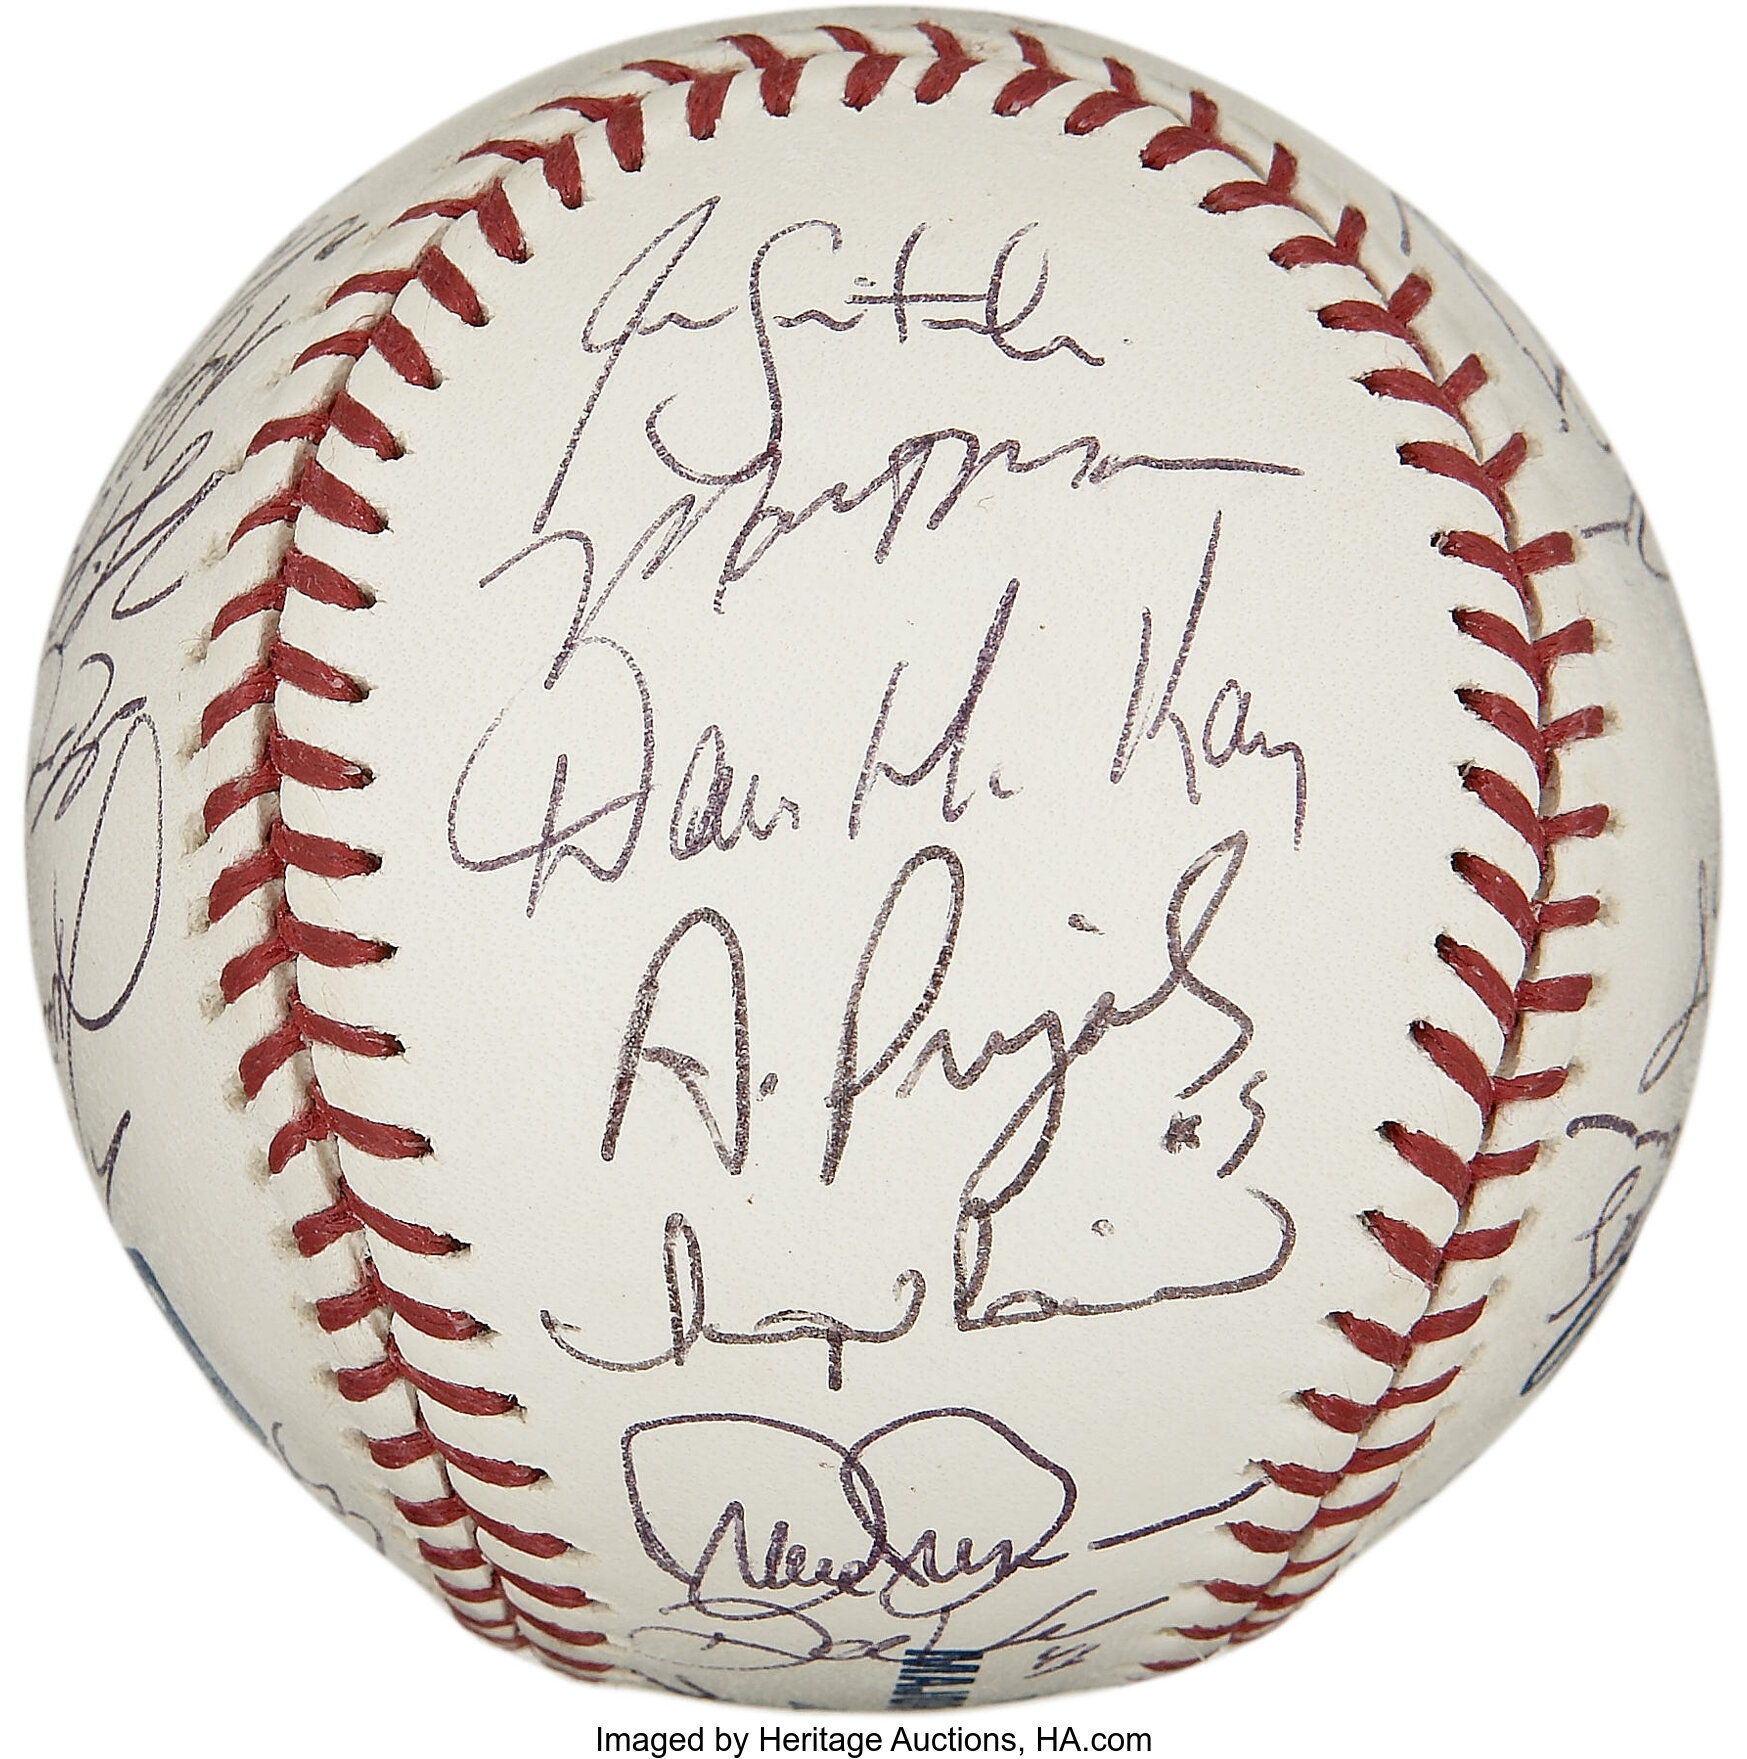 Sold at Auction: Albert Pujols Autographed Baseball